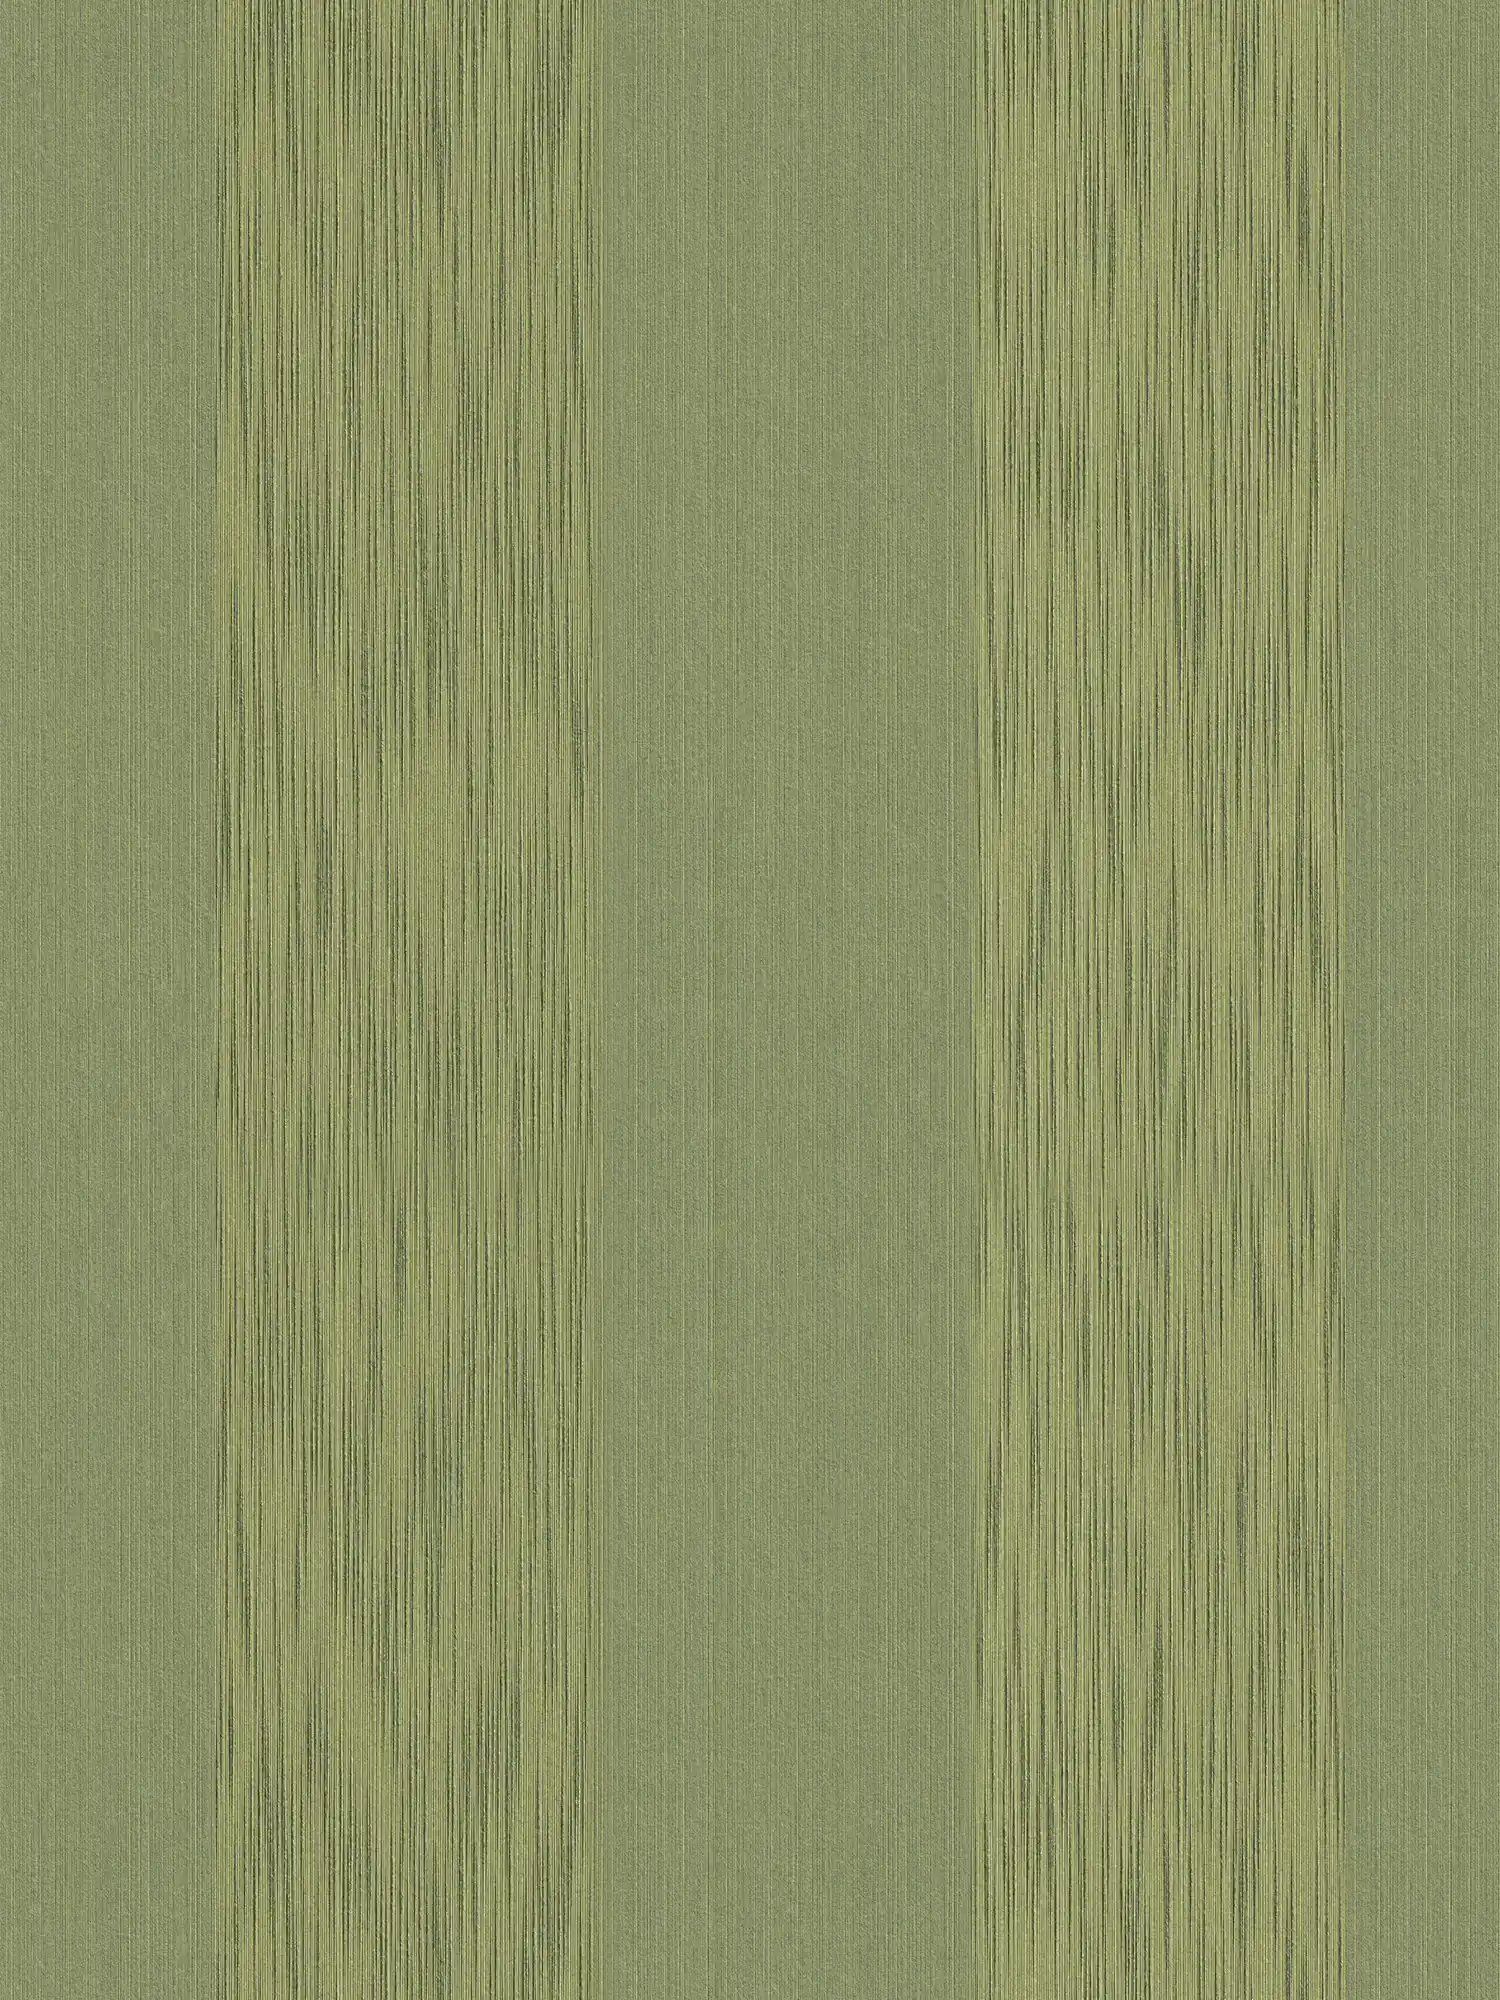 Textured wallpaper with metallic effect & striped pattern - green
